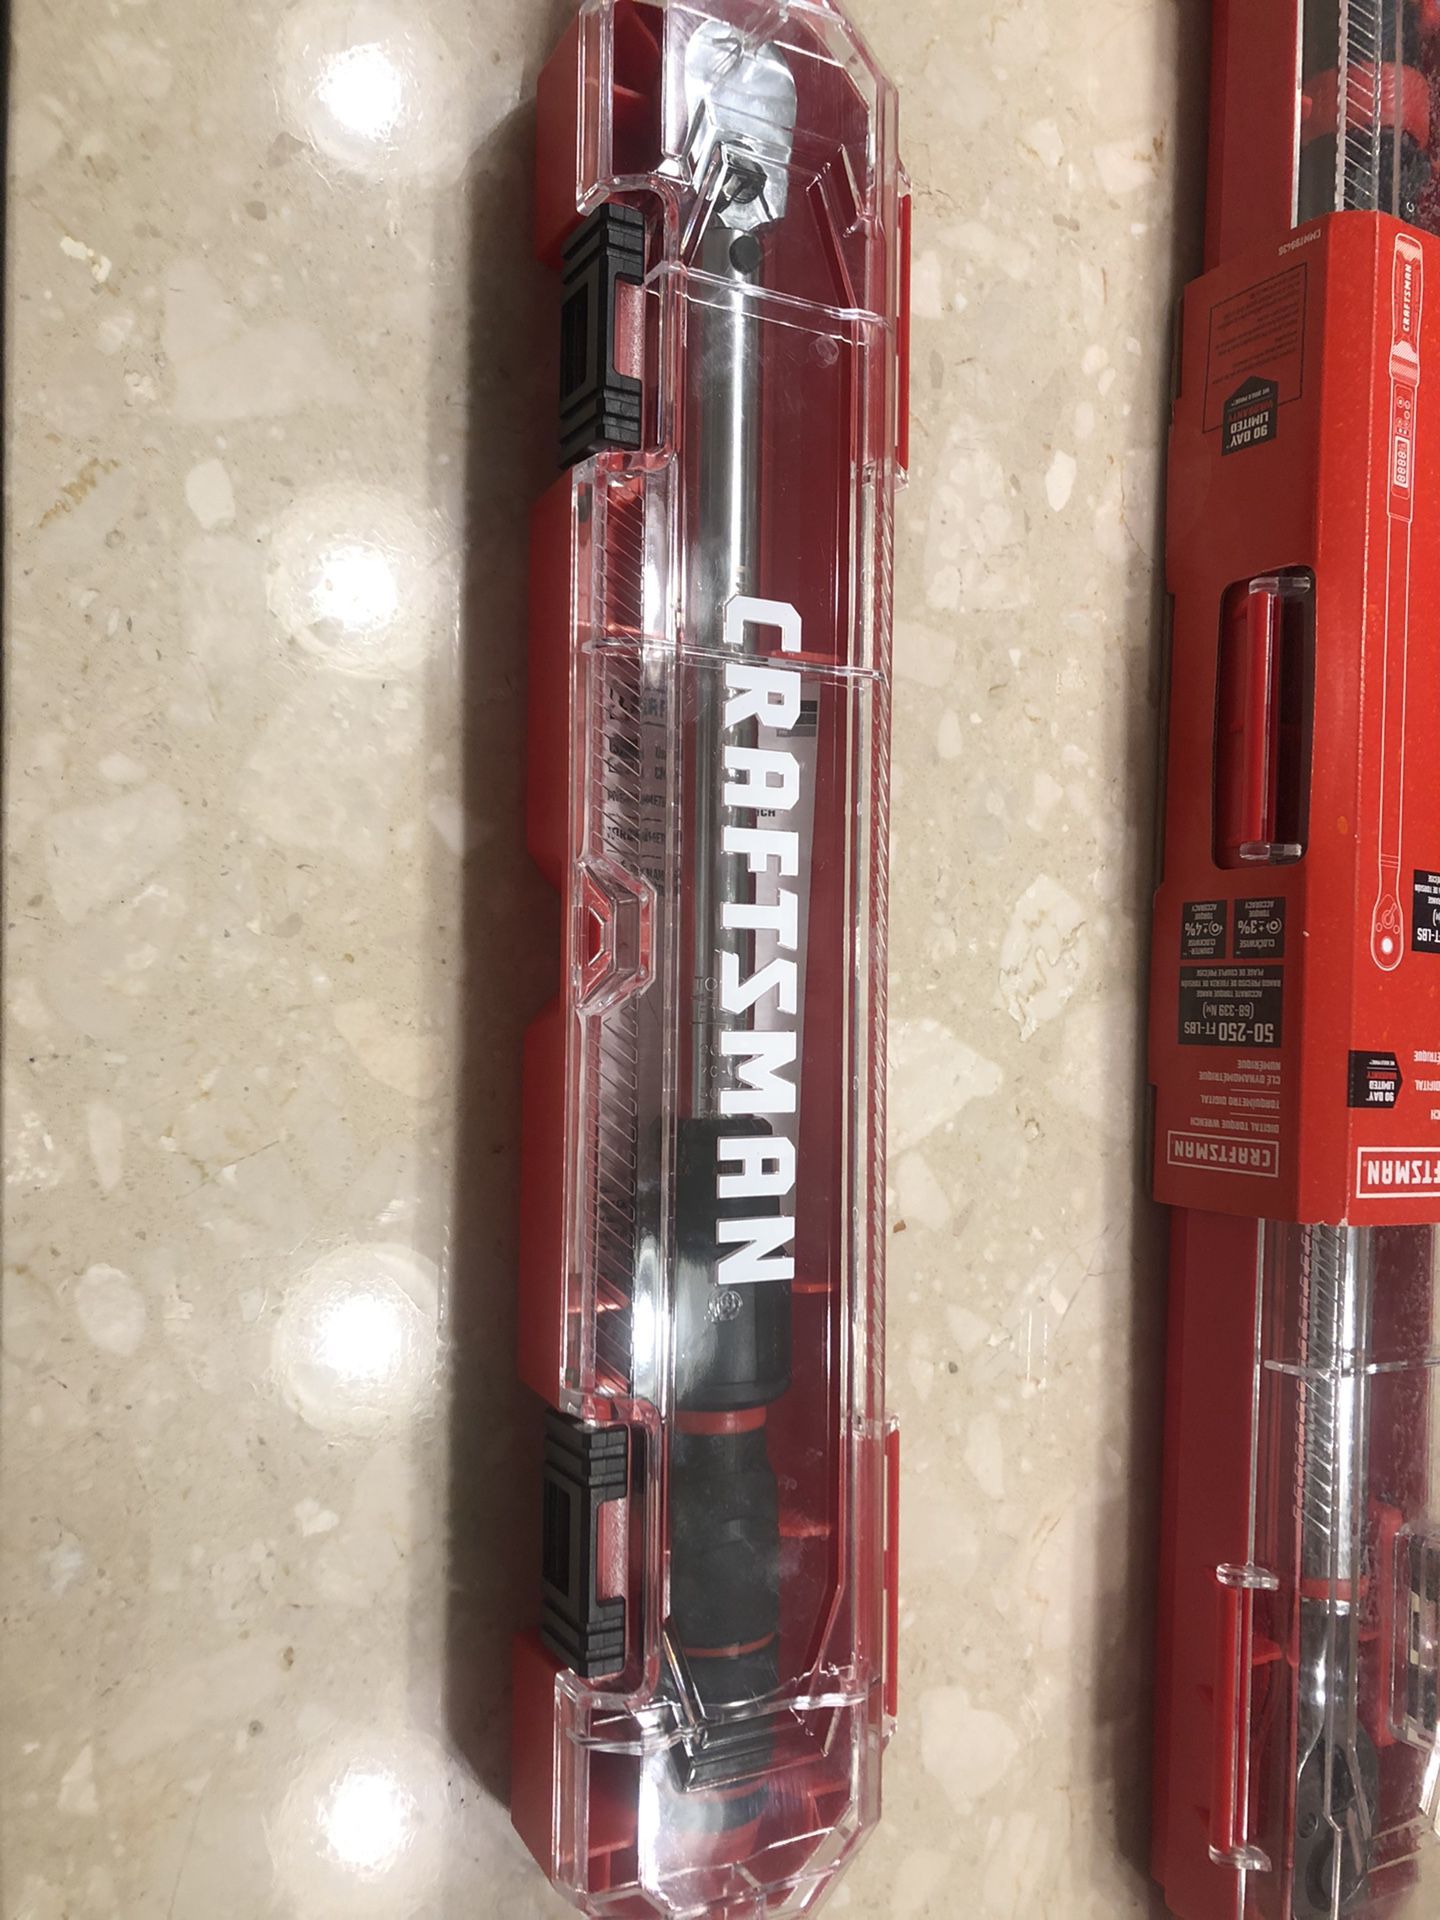 Craftsman 3/8 drive TORQUE WRENCH